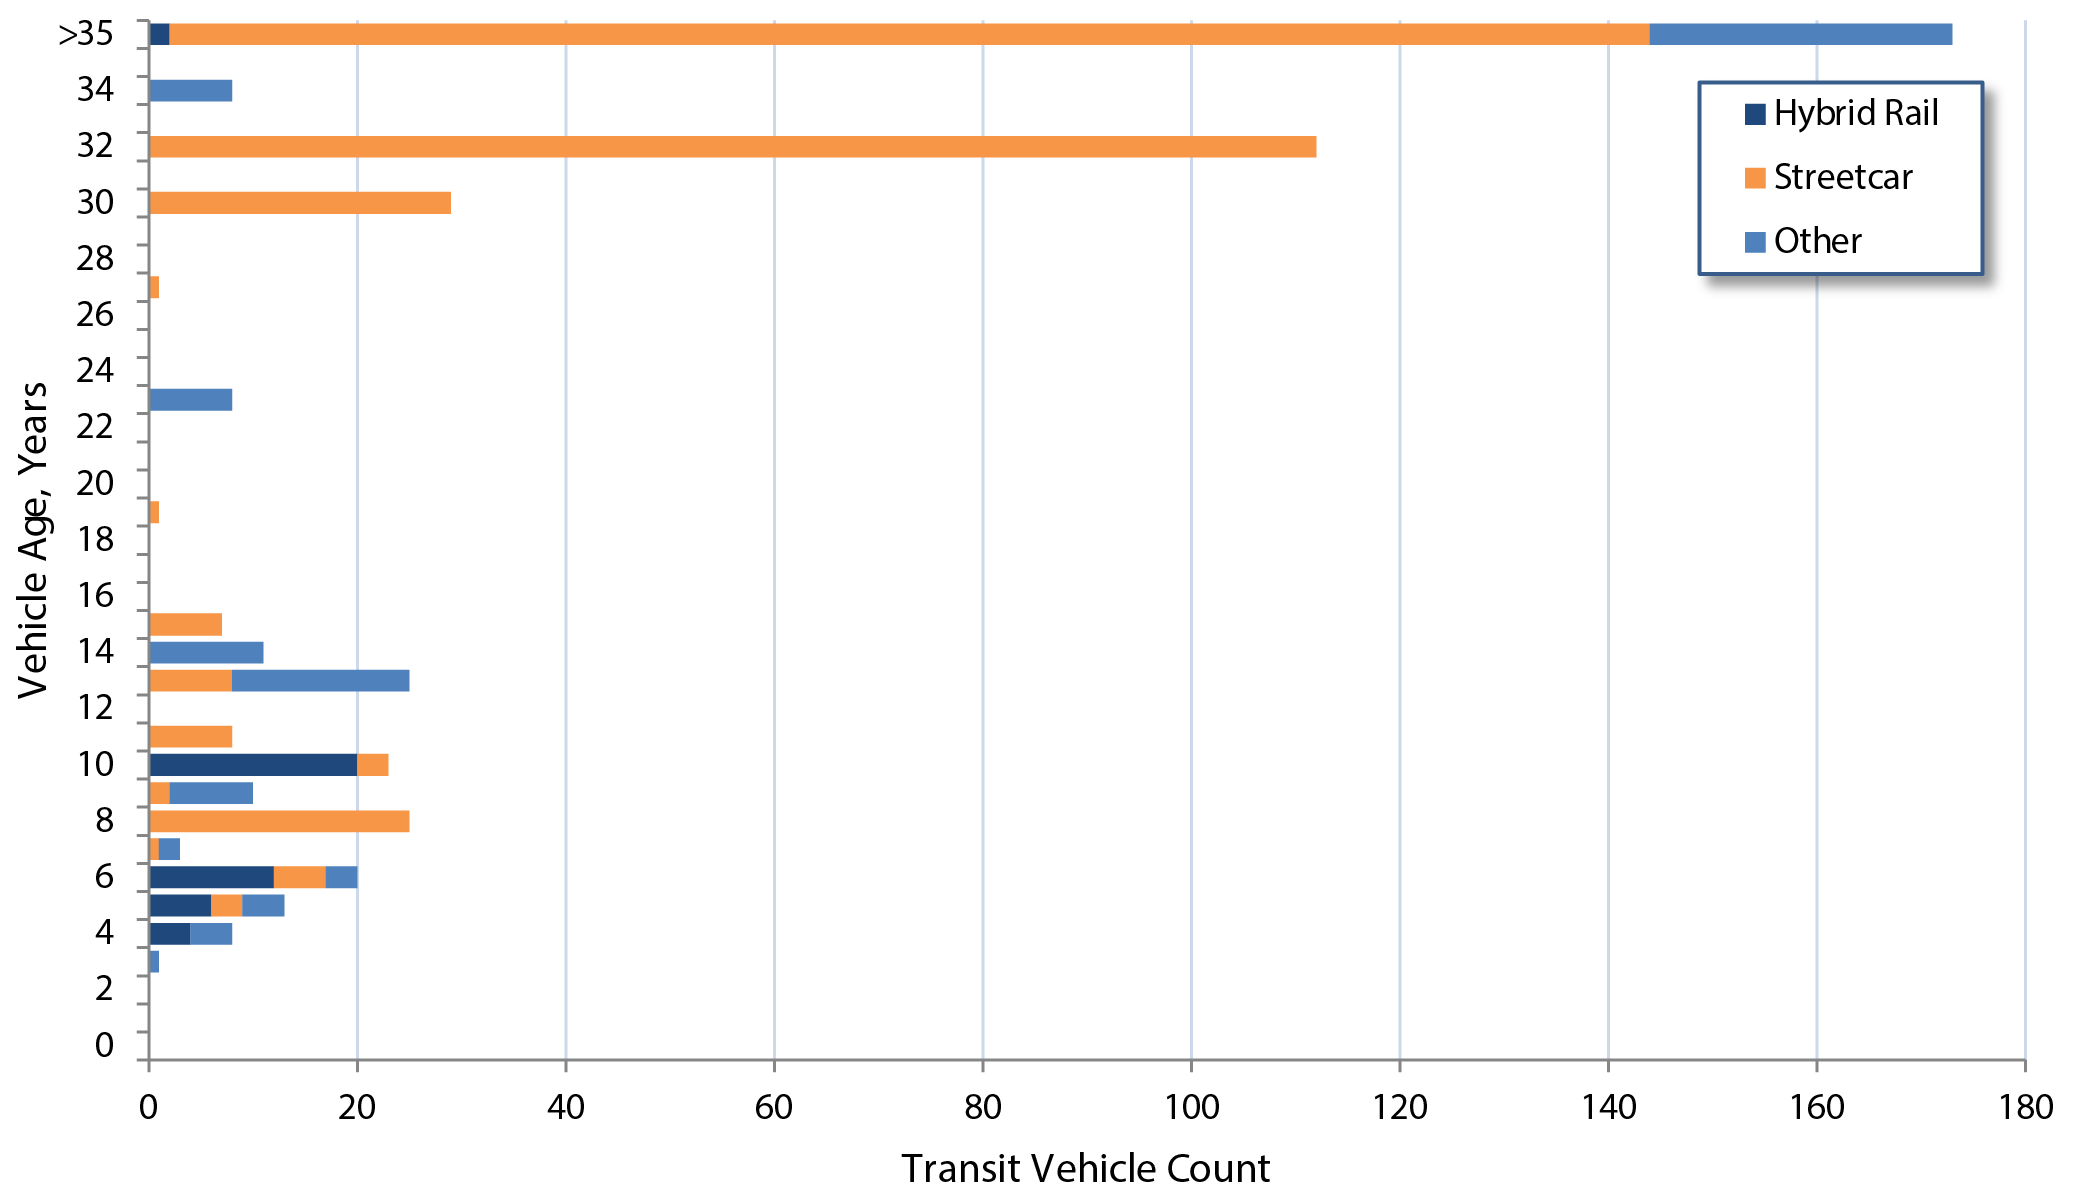 A stacked horizontal bar chart shows the distribution of hybrid rail, streetcar, and other rail vehicles by vehicle age. The count of vehicles with an age of 8 years consists of 25 streetcars. The count of vehicles with an age of 13 years also totals 25 units, and other rail vehicles dominate with 17 units, followed by streetcars with 8 units. Above 30 years, streetcar tends to dominate the total count, with the count of vehicles with an age of 30 years and 32 years consisting of 29 and 112 streetcars, respectively. For rail transit vehicles with an age more than 35 years, the breakdown is 2 hybrid rail units, 142 streetcar units, and 29 other rail vehicle units. Remaining age groups have vehicle counts under 25, and in the lower ages, hybrid rail dominates the total count. Source: Transit Economic Requirements Model and National Transit Database. 